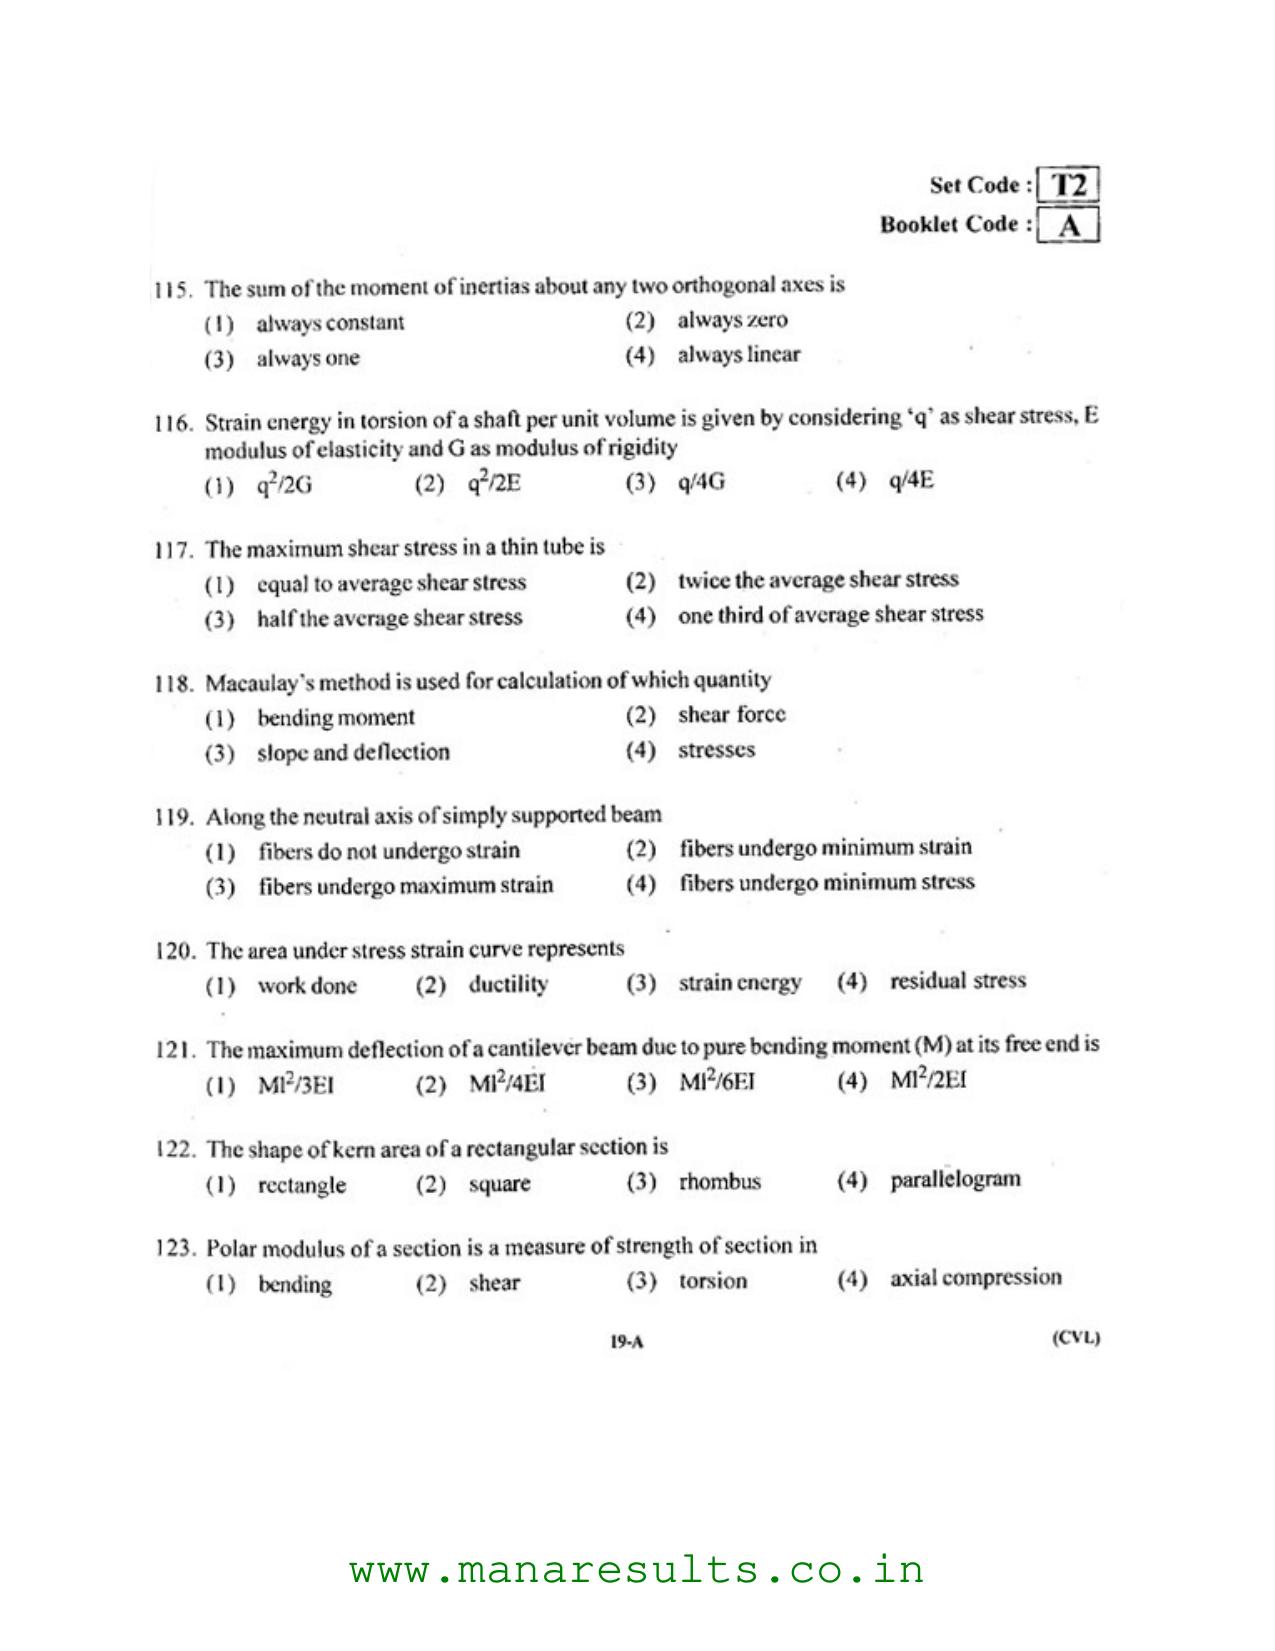 AP ECET 2016 Civil Engineering Old Previous Question Papers - Page 18